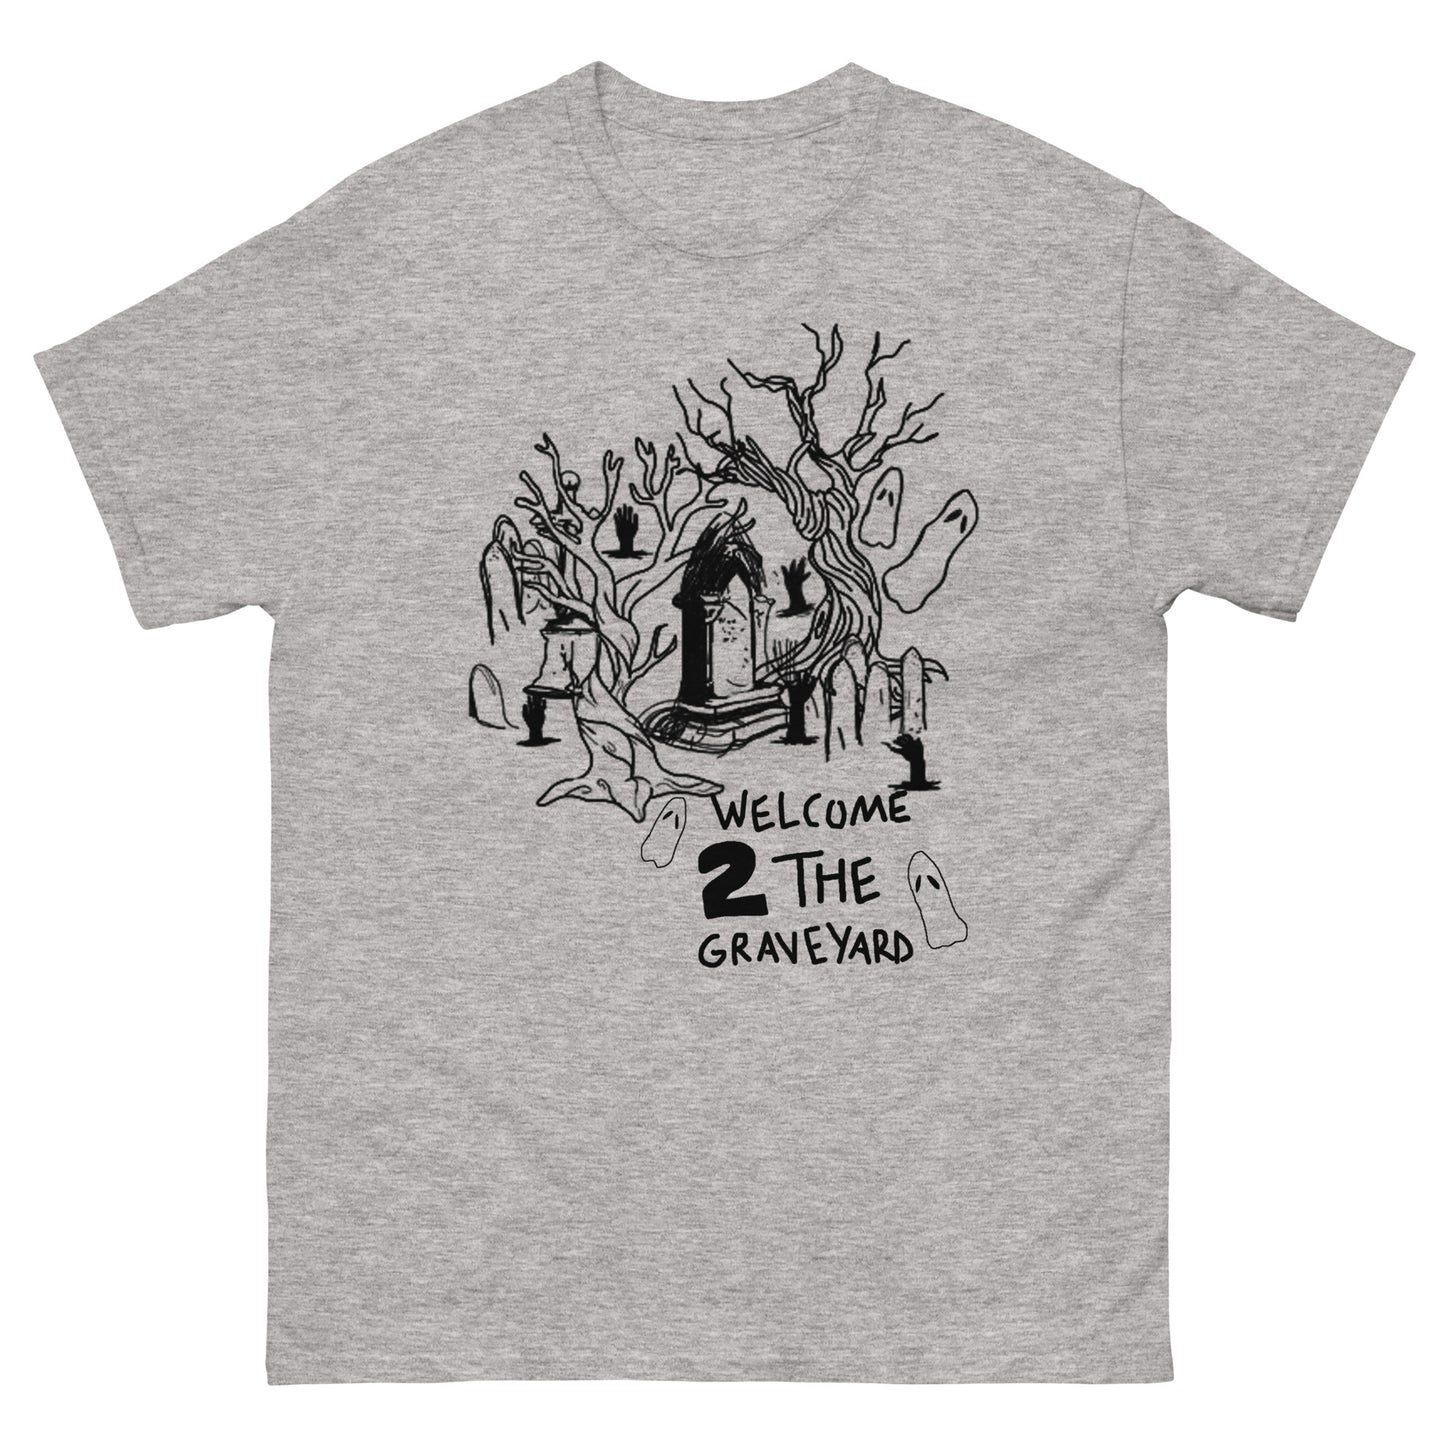 "WELCOME TO THE GRAVEYARD" TEE